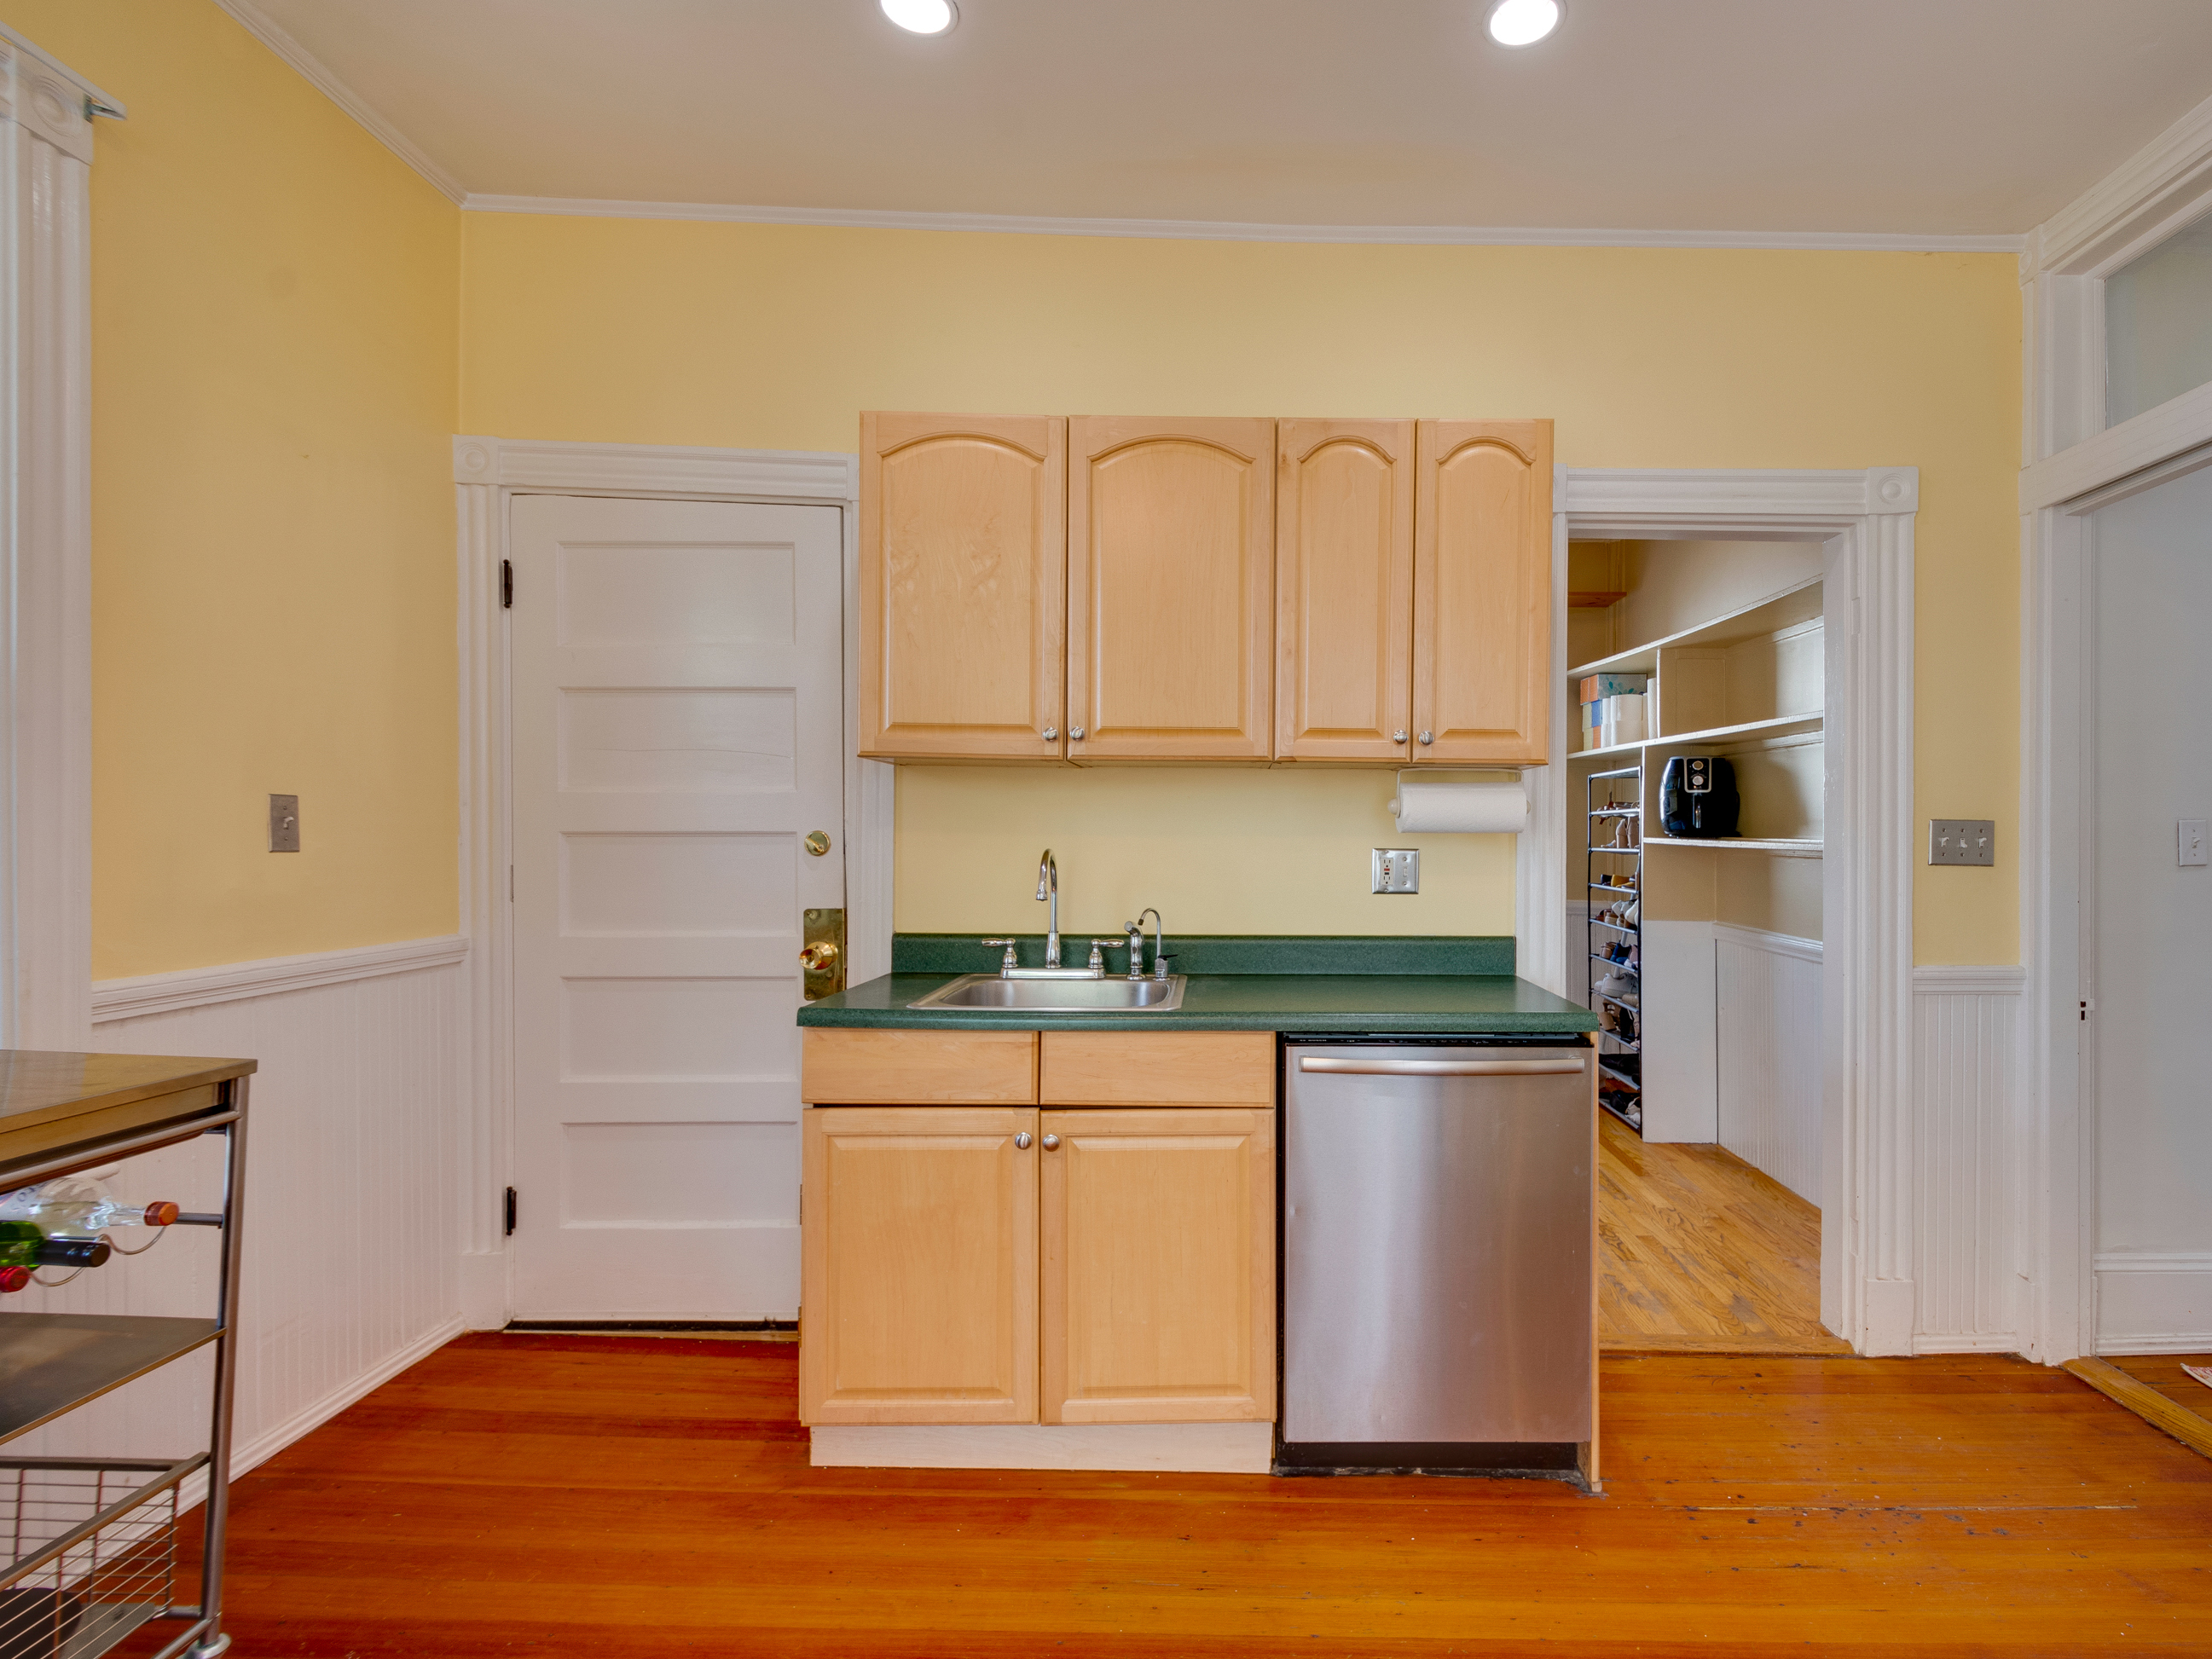 Roslindale  single family offered by Trisha Solio